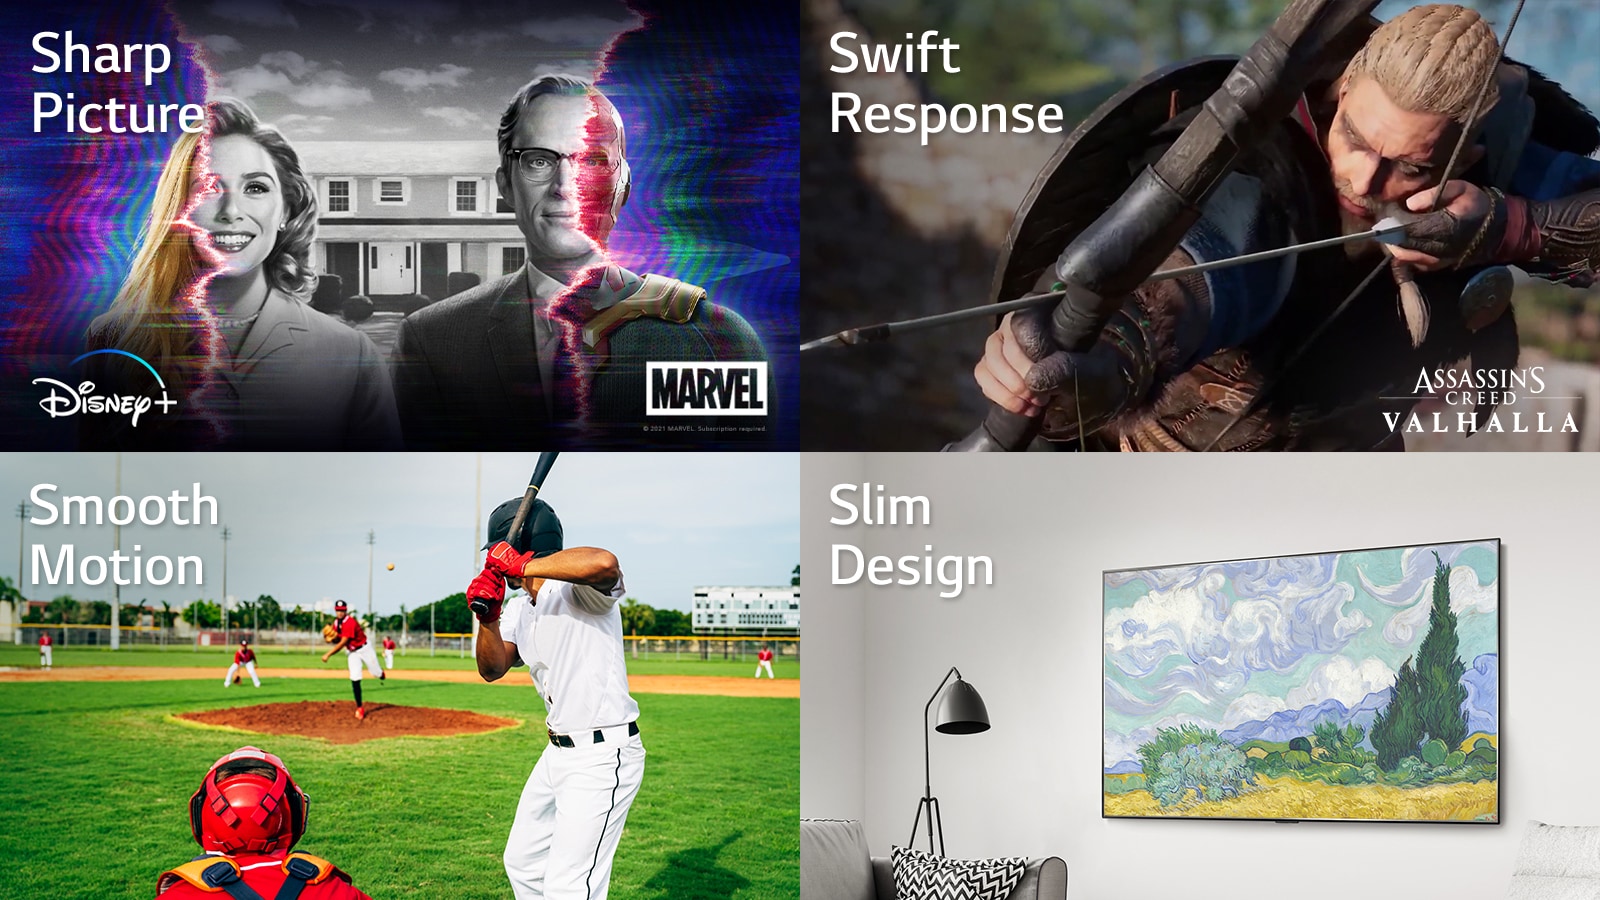 Four screen split of OLED TV features including: A scene from Marvel WandaVision on Disney+, A game scene from Assassin’s Creed Valhalla, A hitter trying to hit a baseball during the game, A work of art on a TV screen hung on the wall.